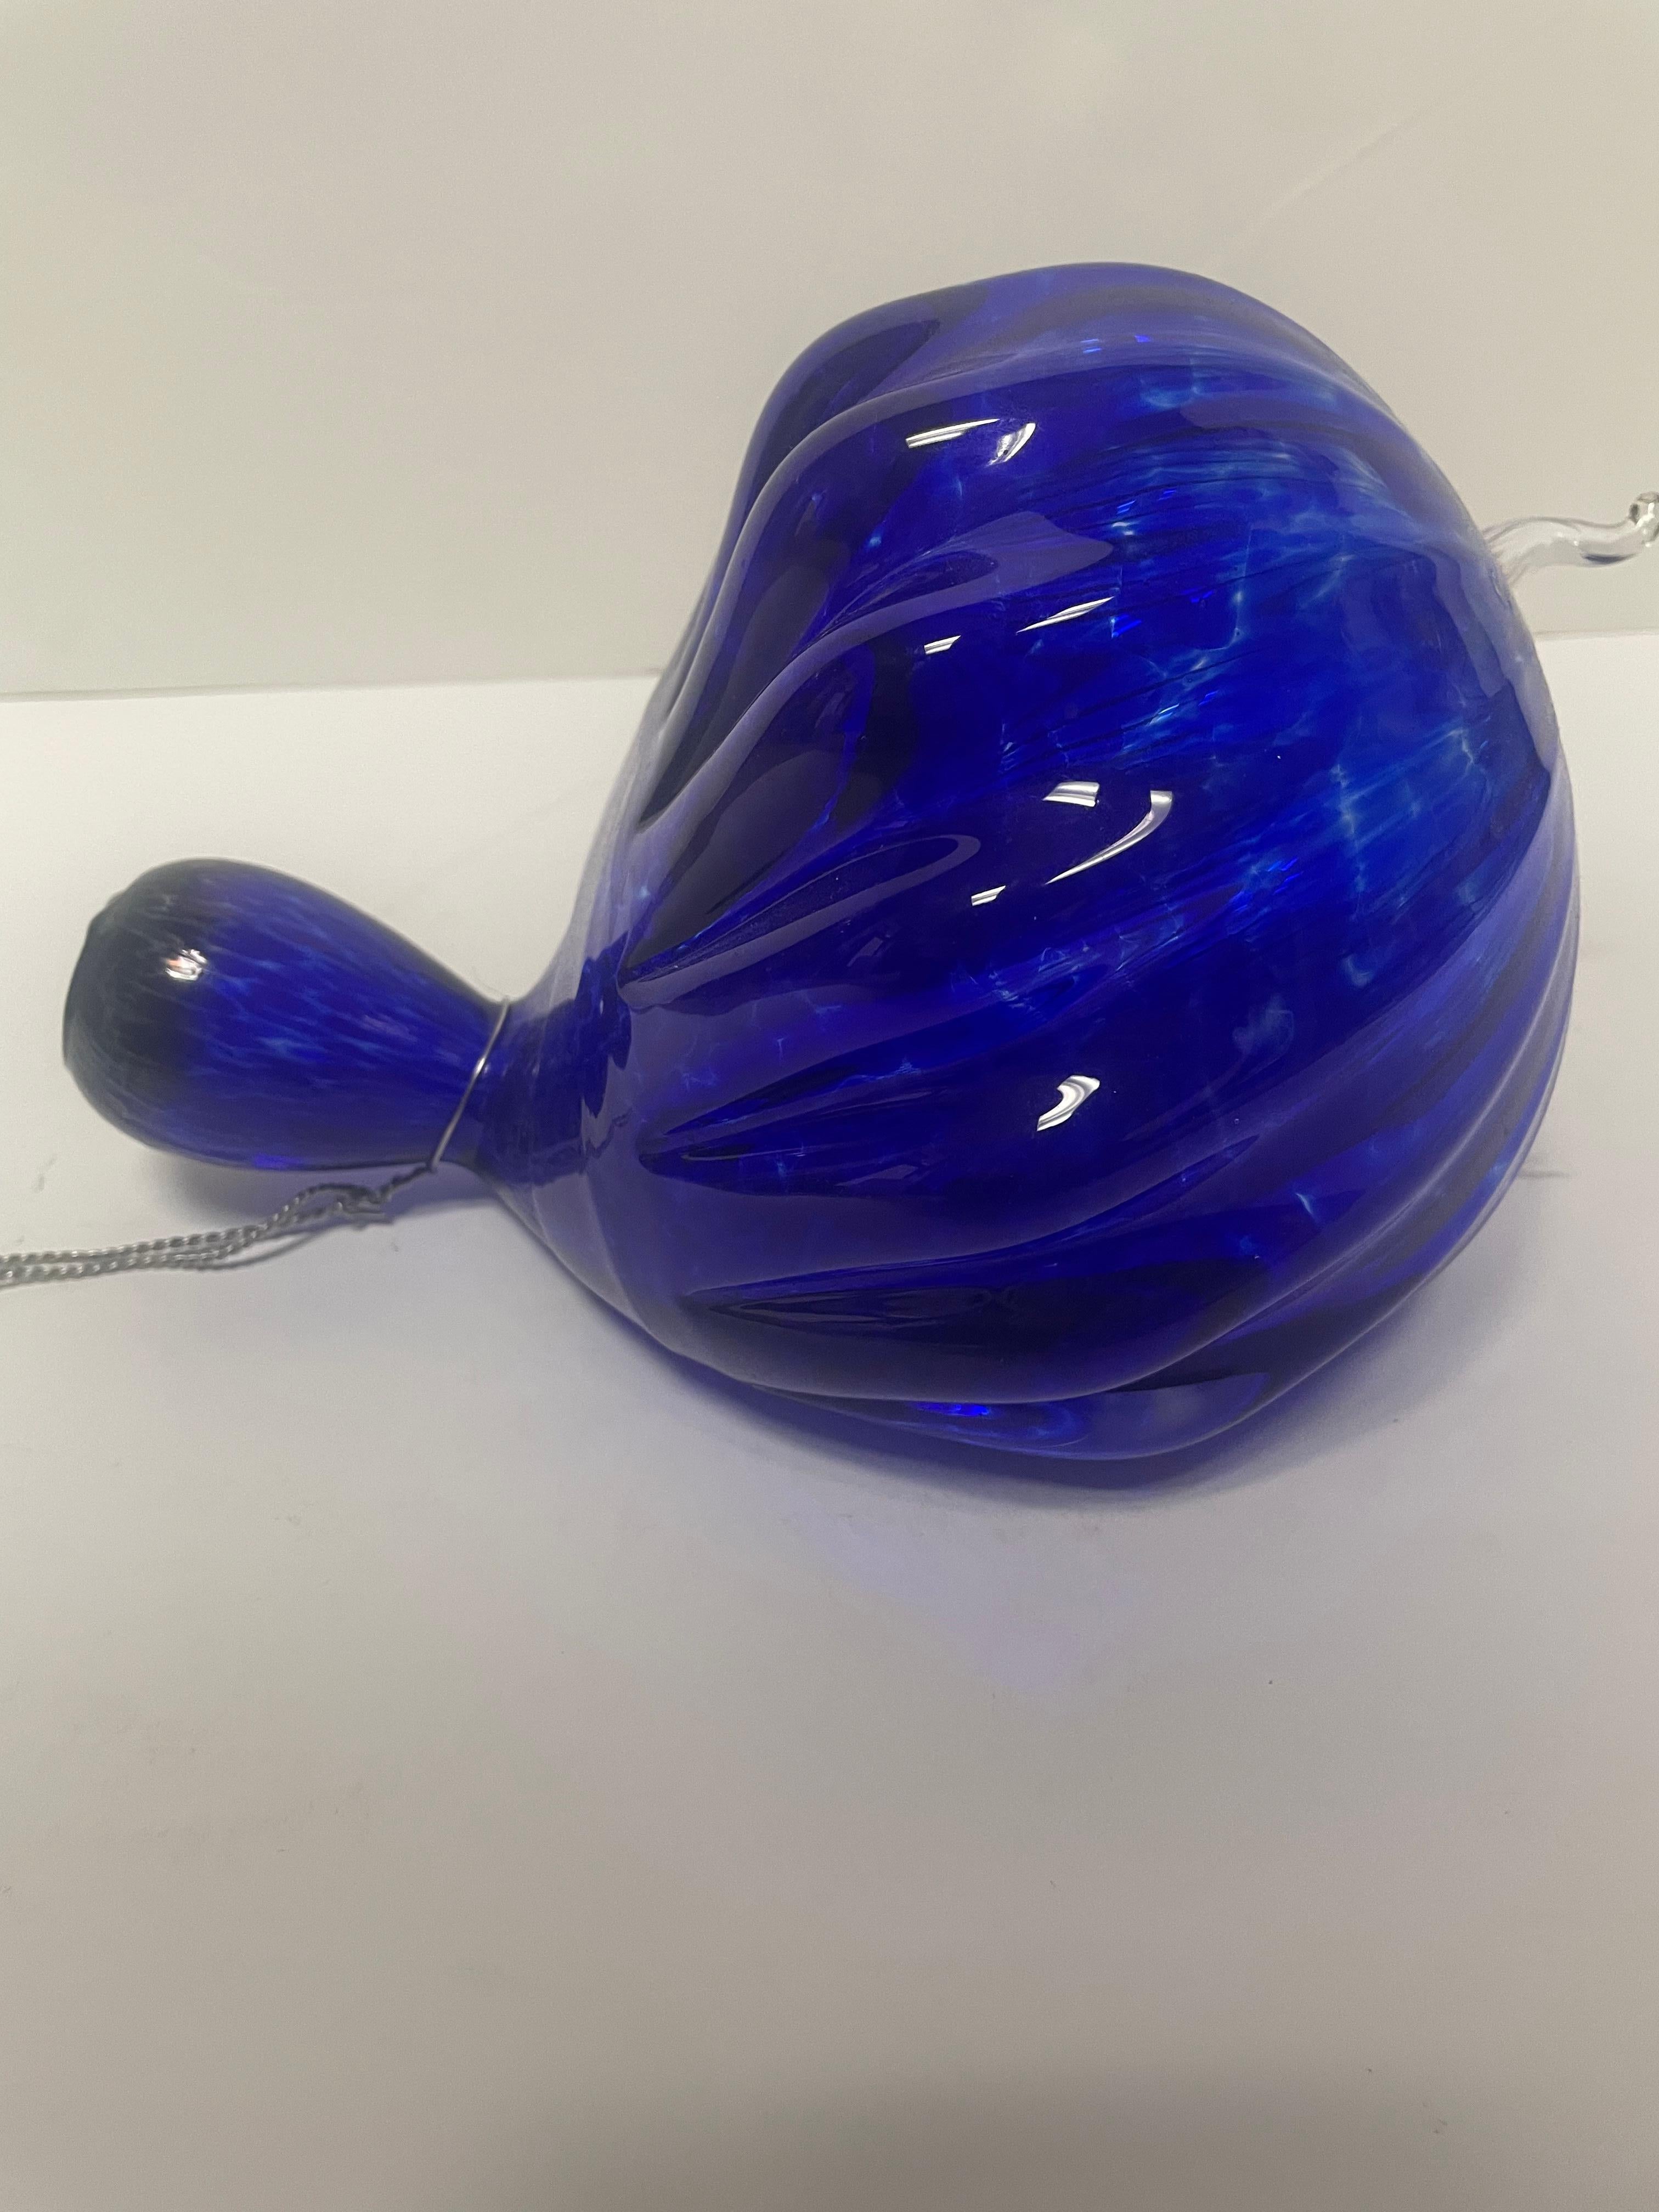 What kind of glass does Chihuly use?